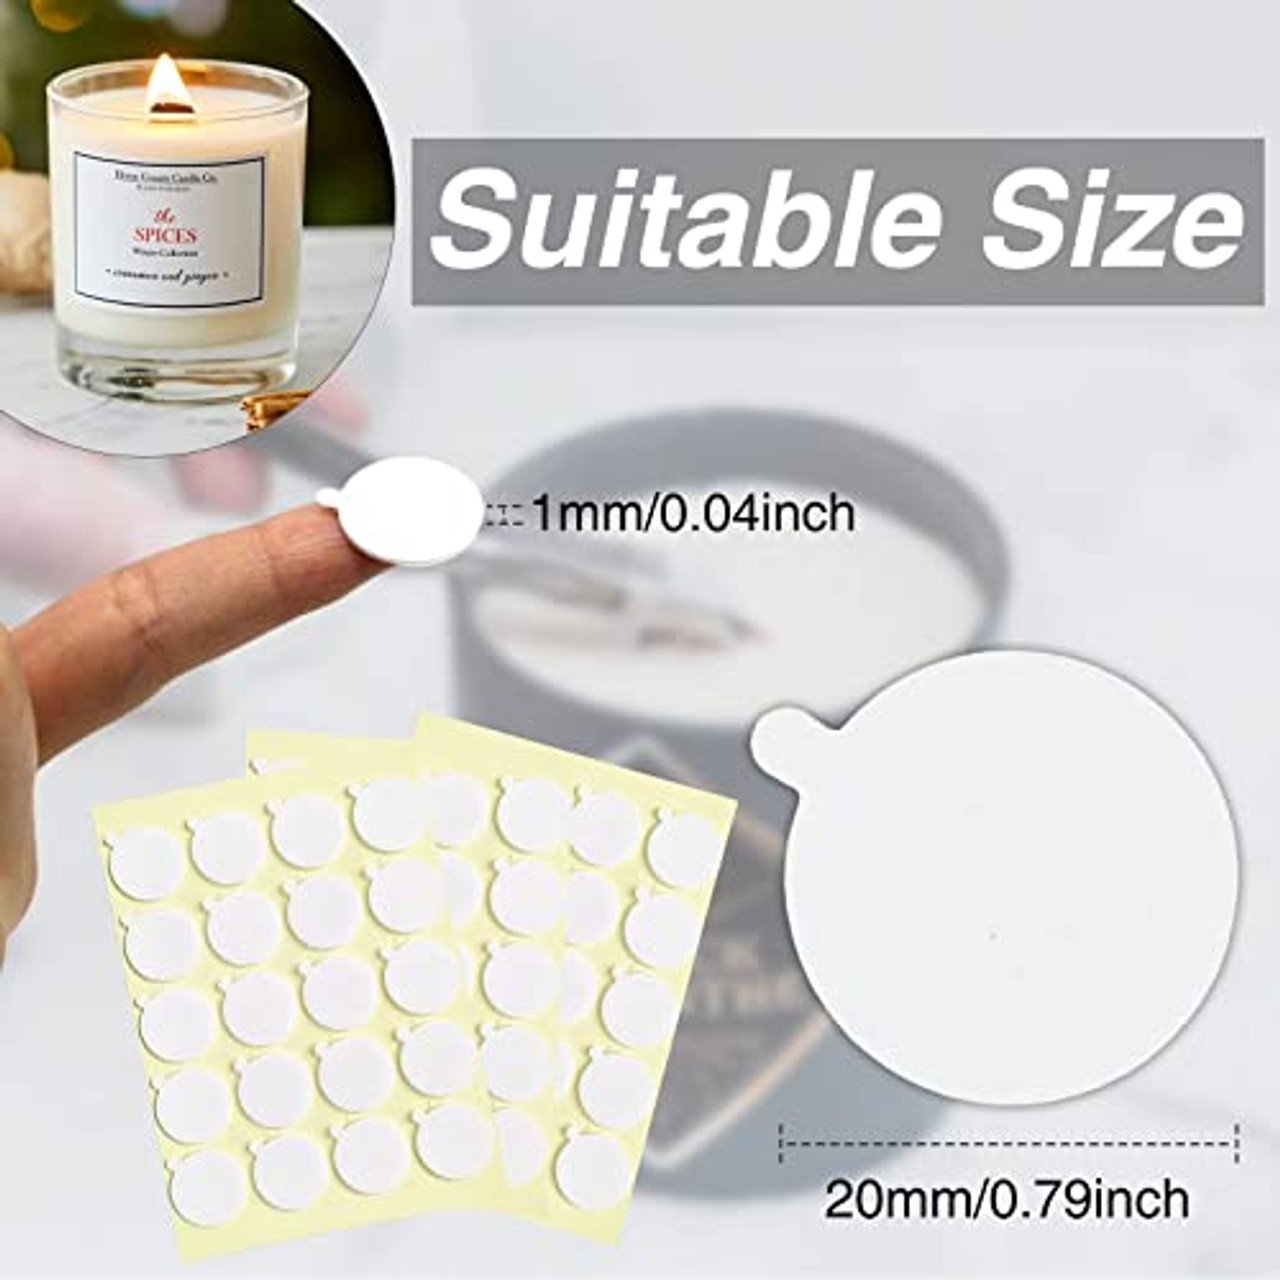 300 Pieces Heat Resistance Candle Wick Stickers, Double-Sided Wick Stickers  for Candle Making, Candle Making Supplies